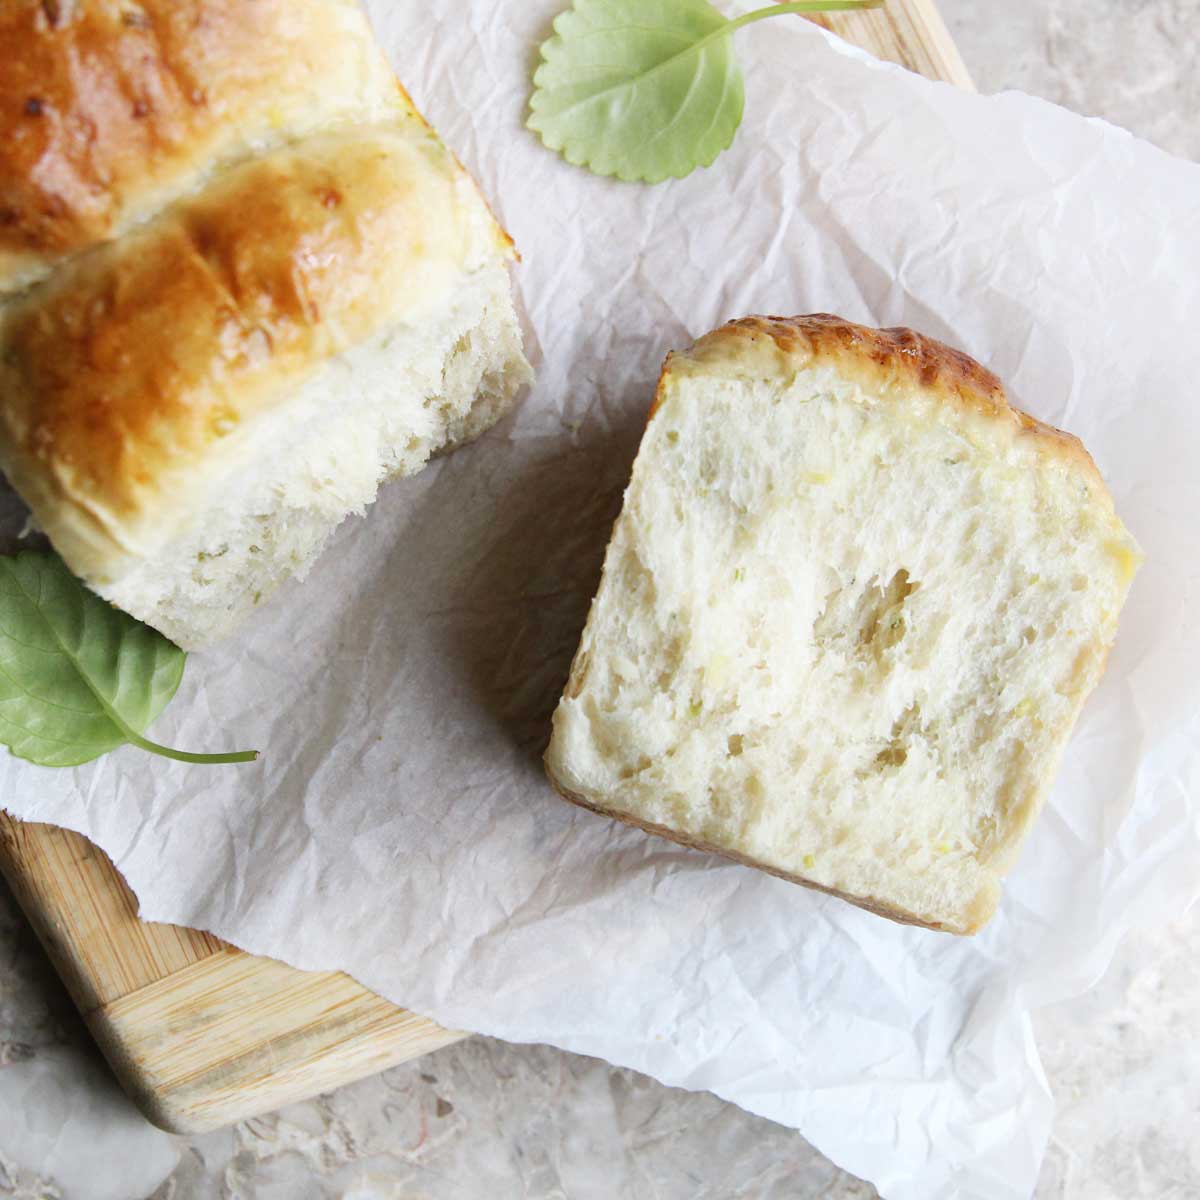 Vegan Cauliflower & Chive Yeast Bread Recipe for Sandwiches, Toasts and More! - yeast bread